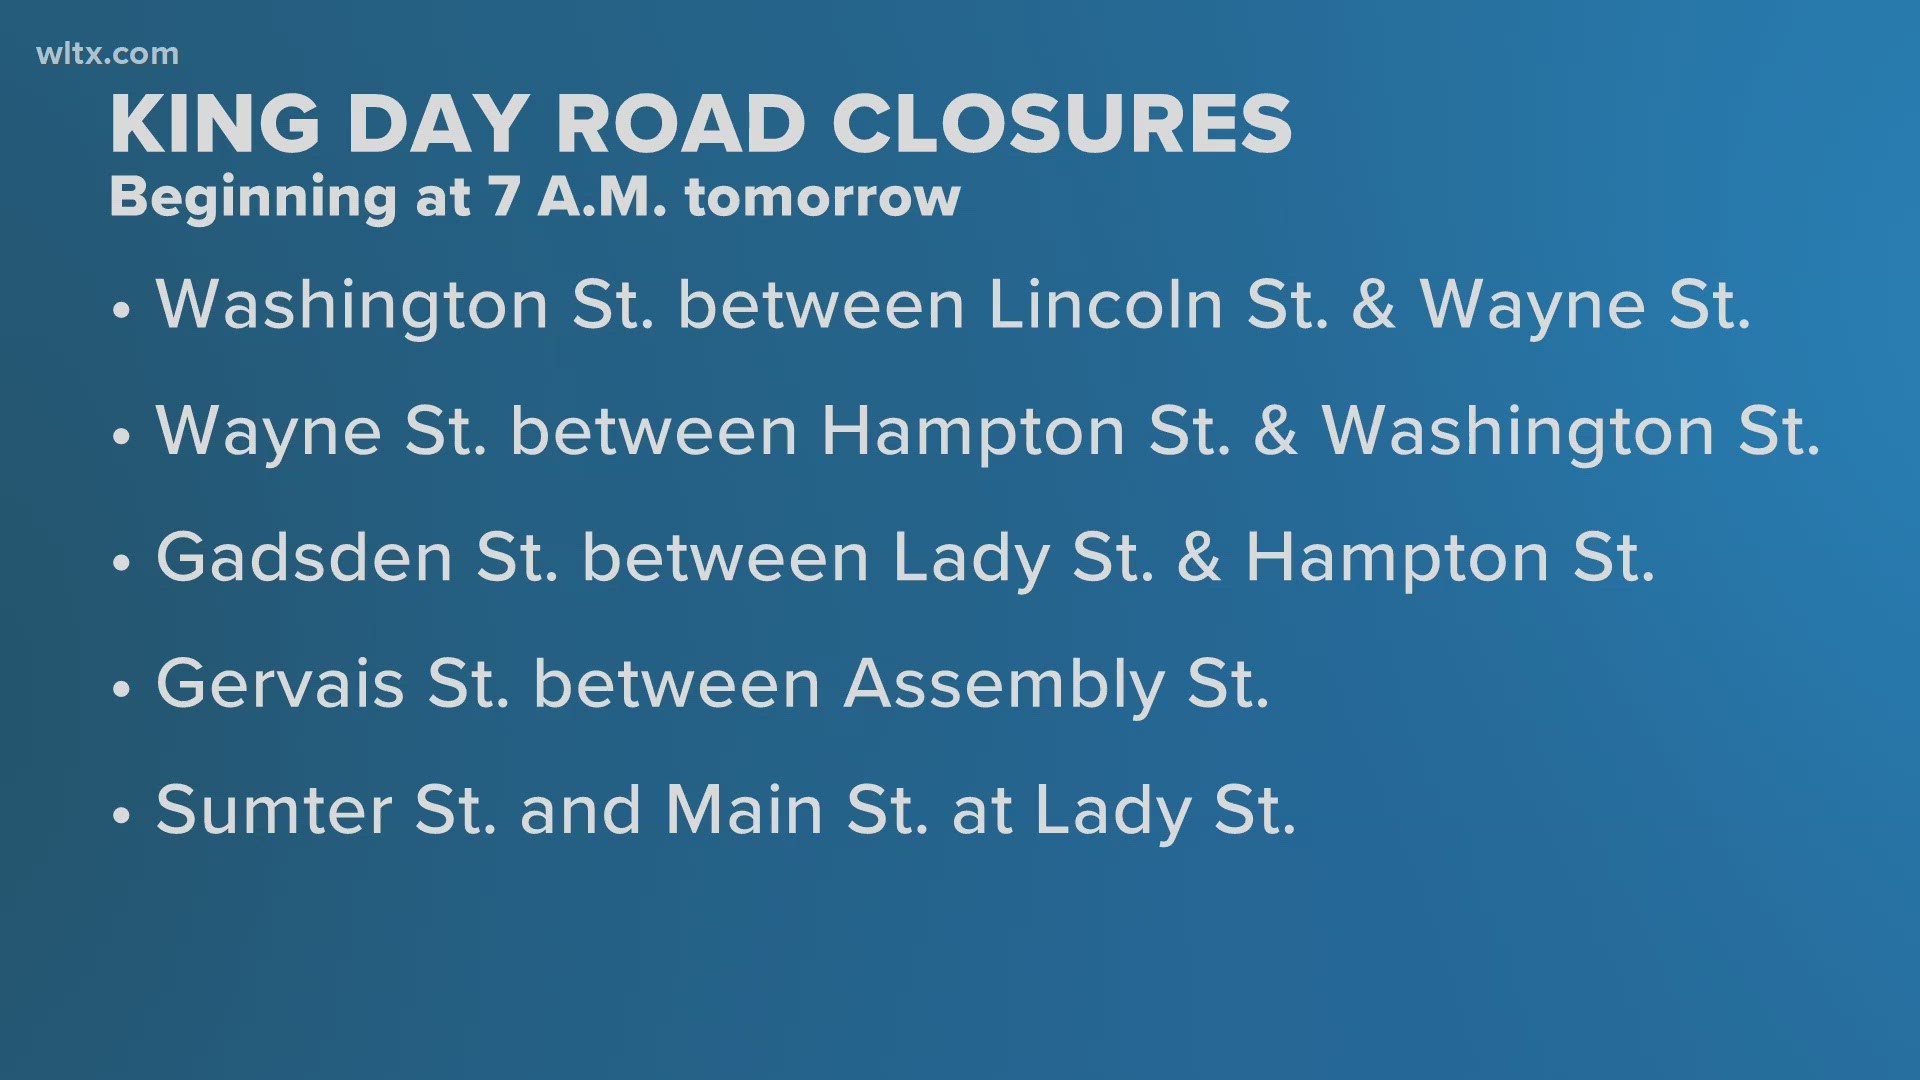 Drivers should expect multiple road closures in downtown Columbia for the event, which includes a march from Zion Baptist Church to the State House.